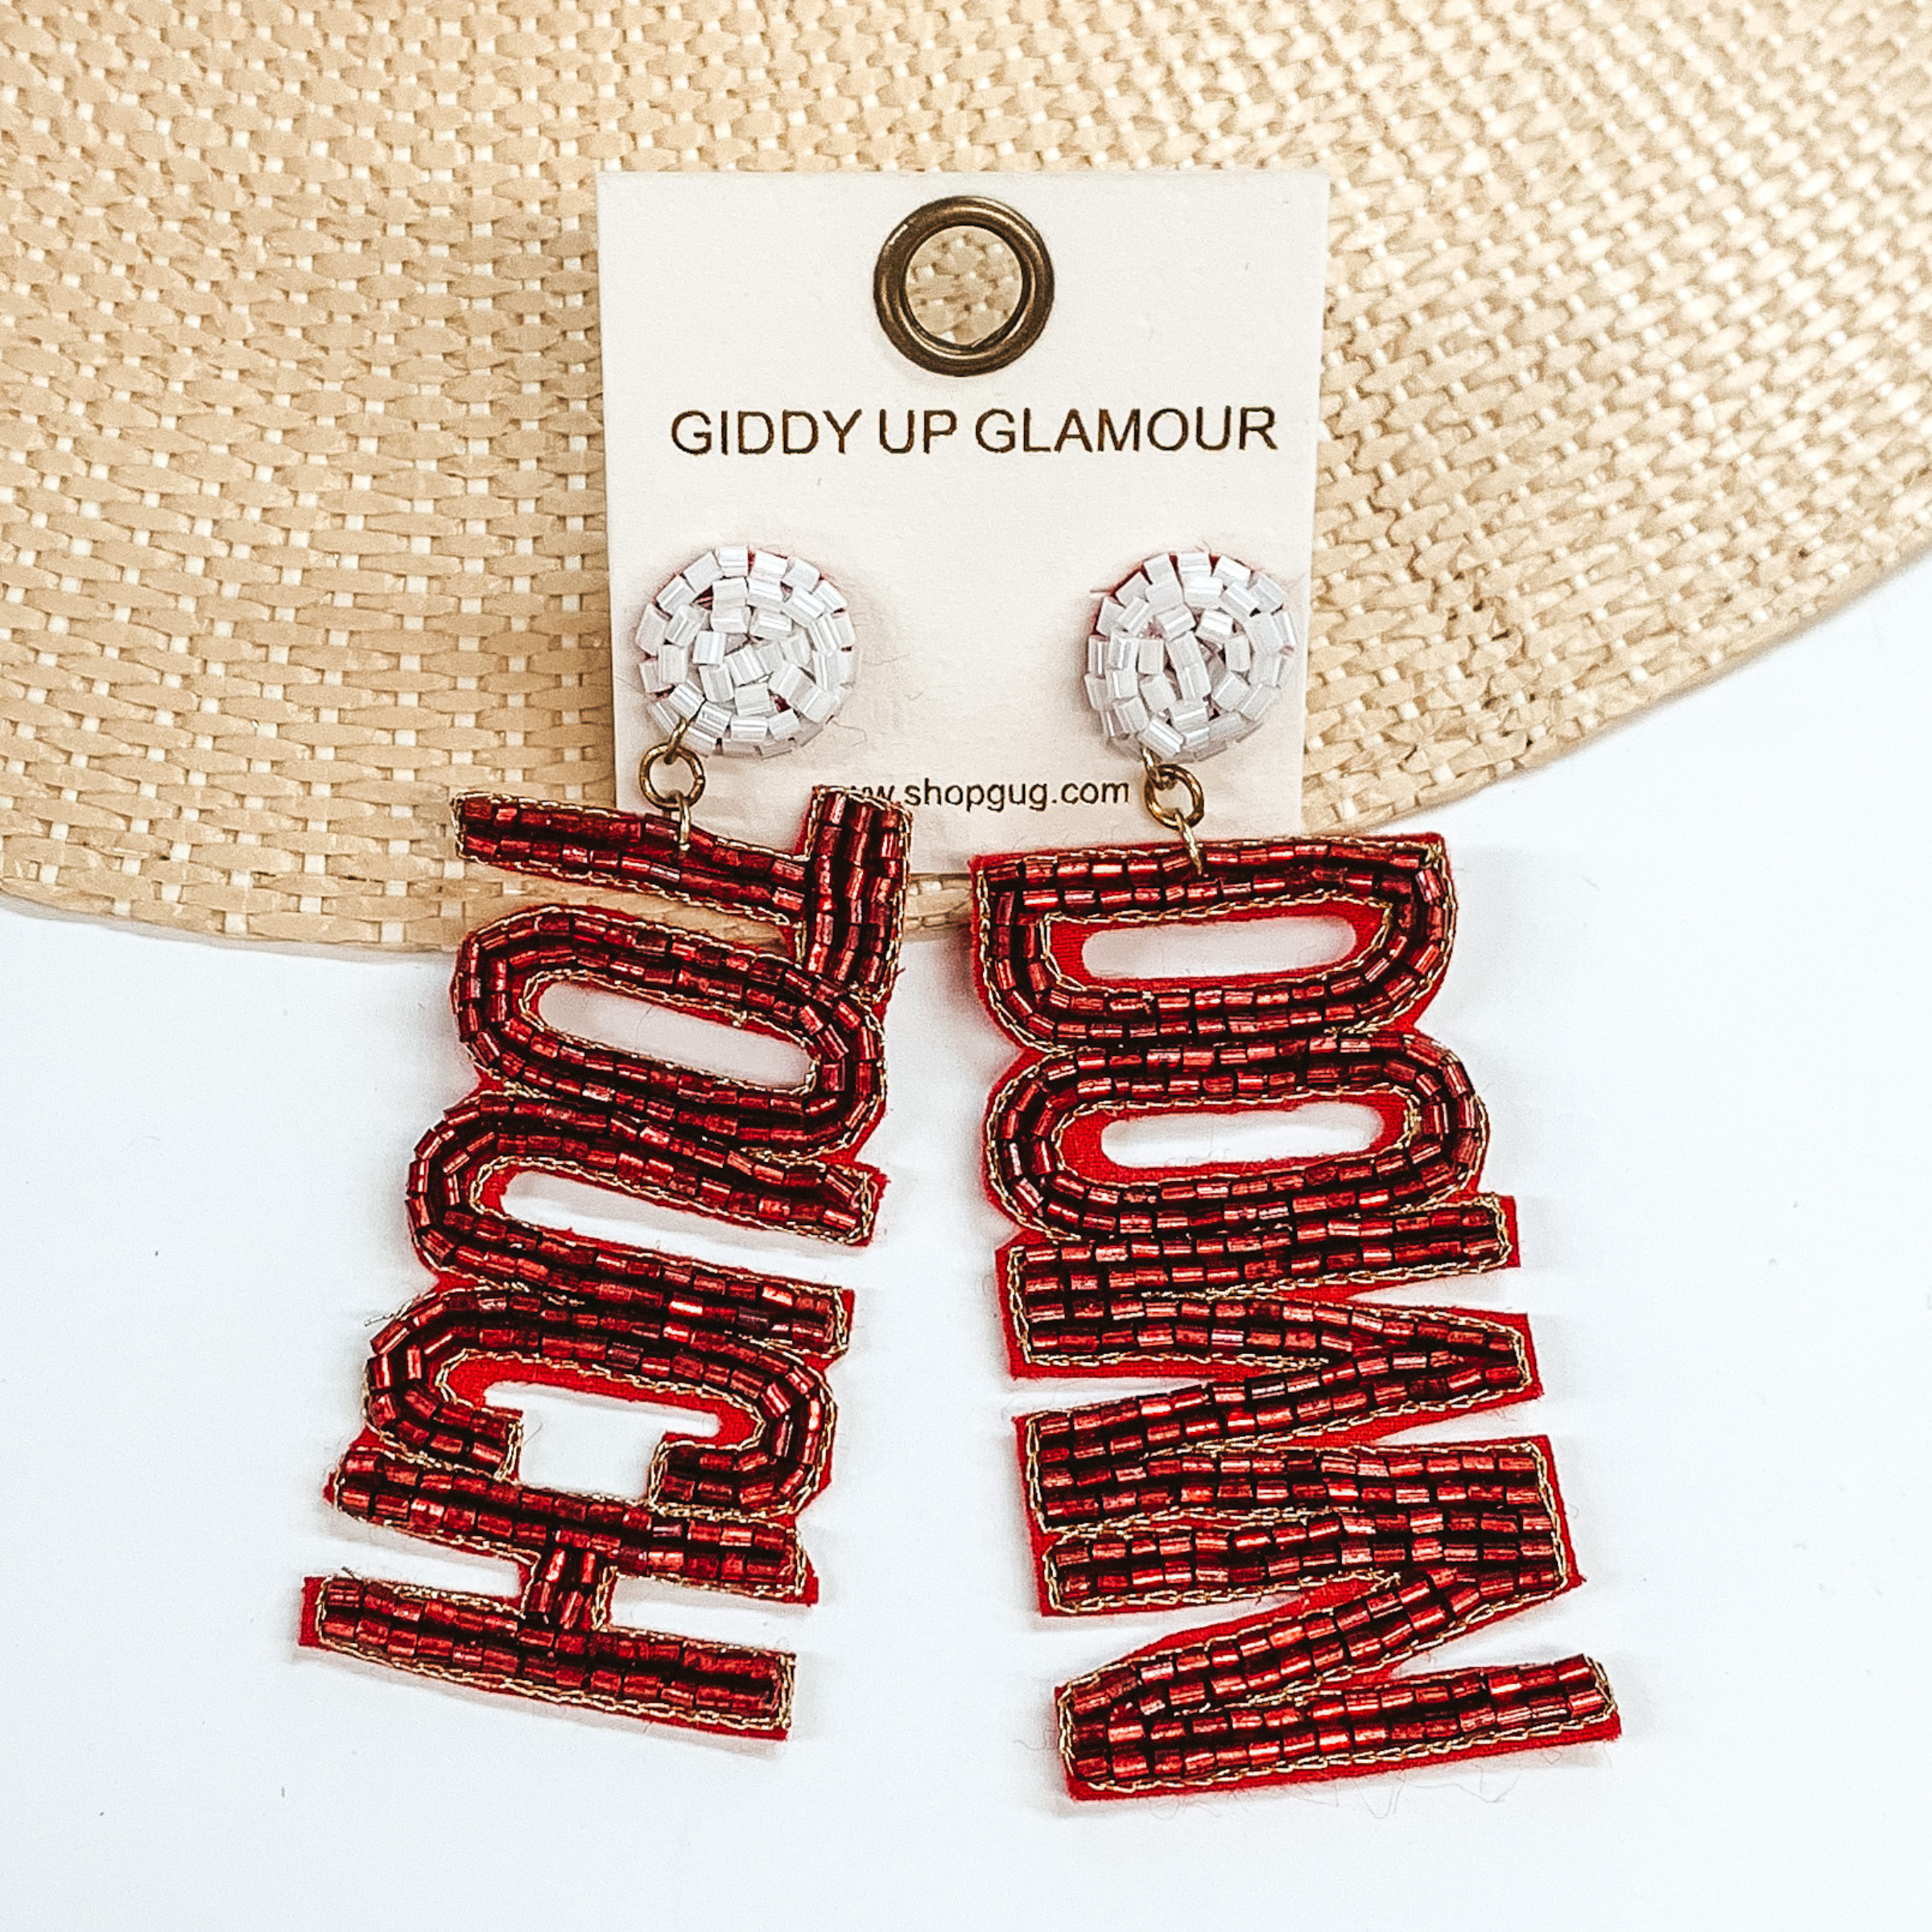 White beaded circle post back earrings. These earrings include the words "Touch" and "Down" in burgundy beads. These earrings are pictured partially laying on a straw hat brim on a white background. 